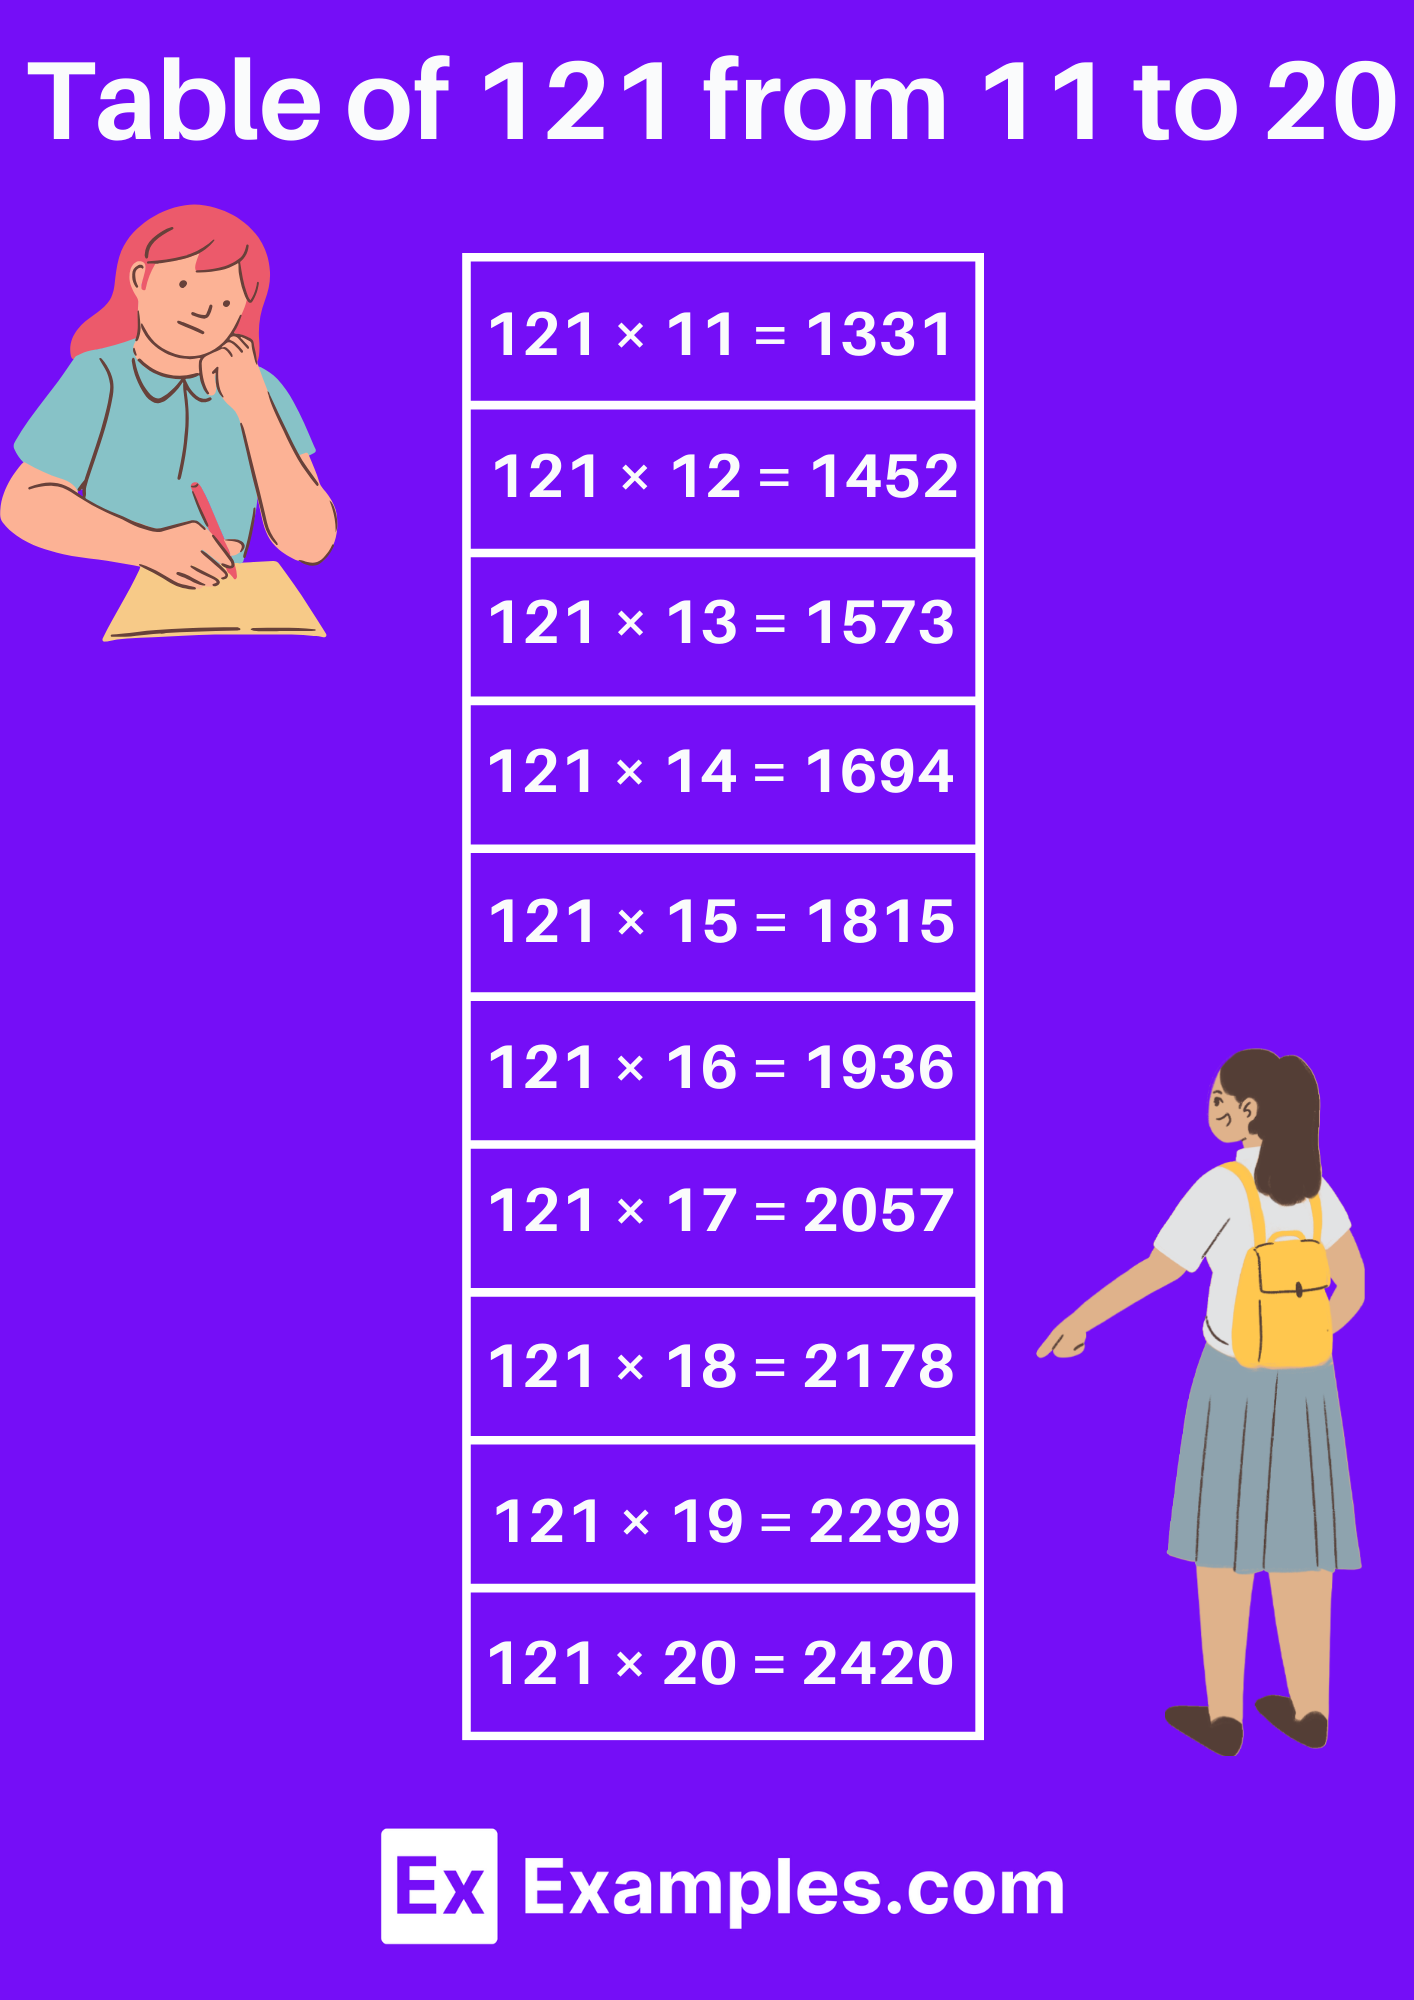 Table-of-121-from-11-to-20